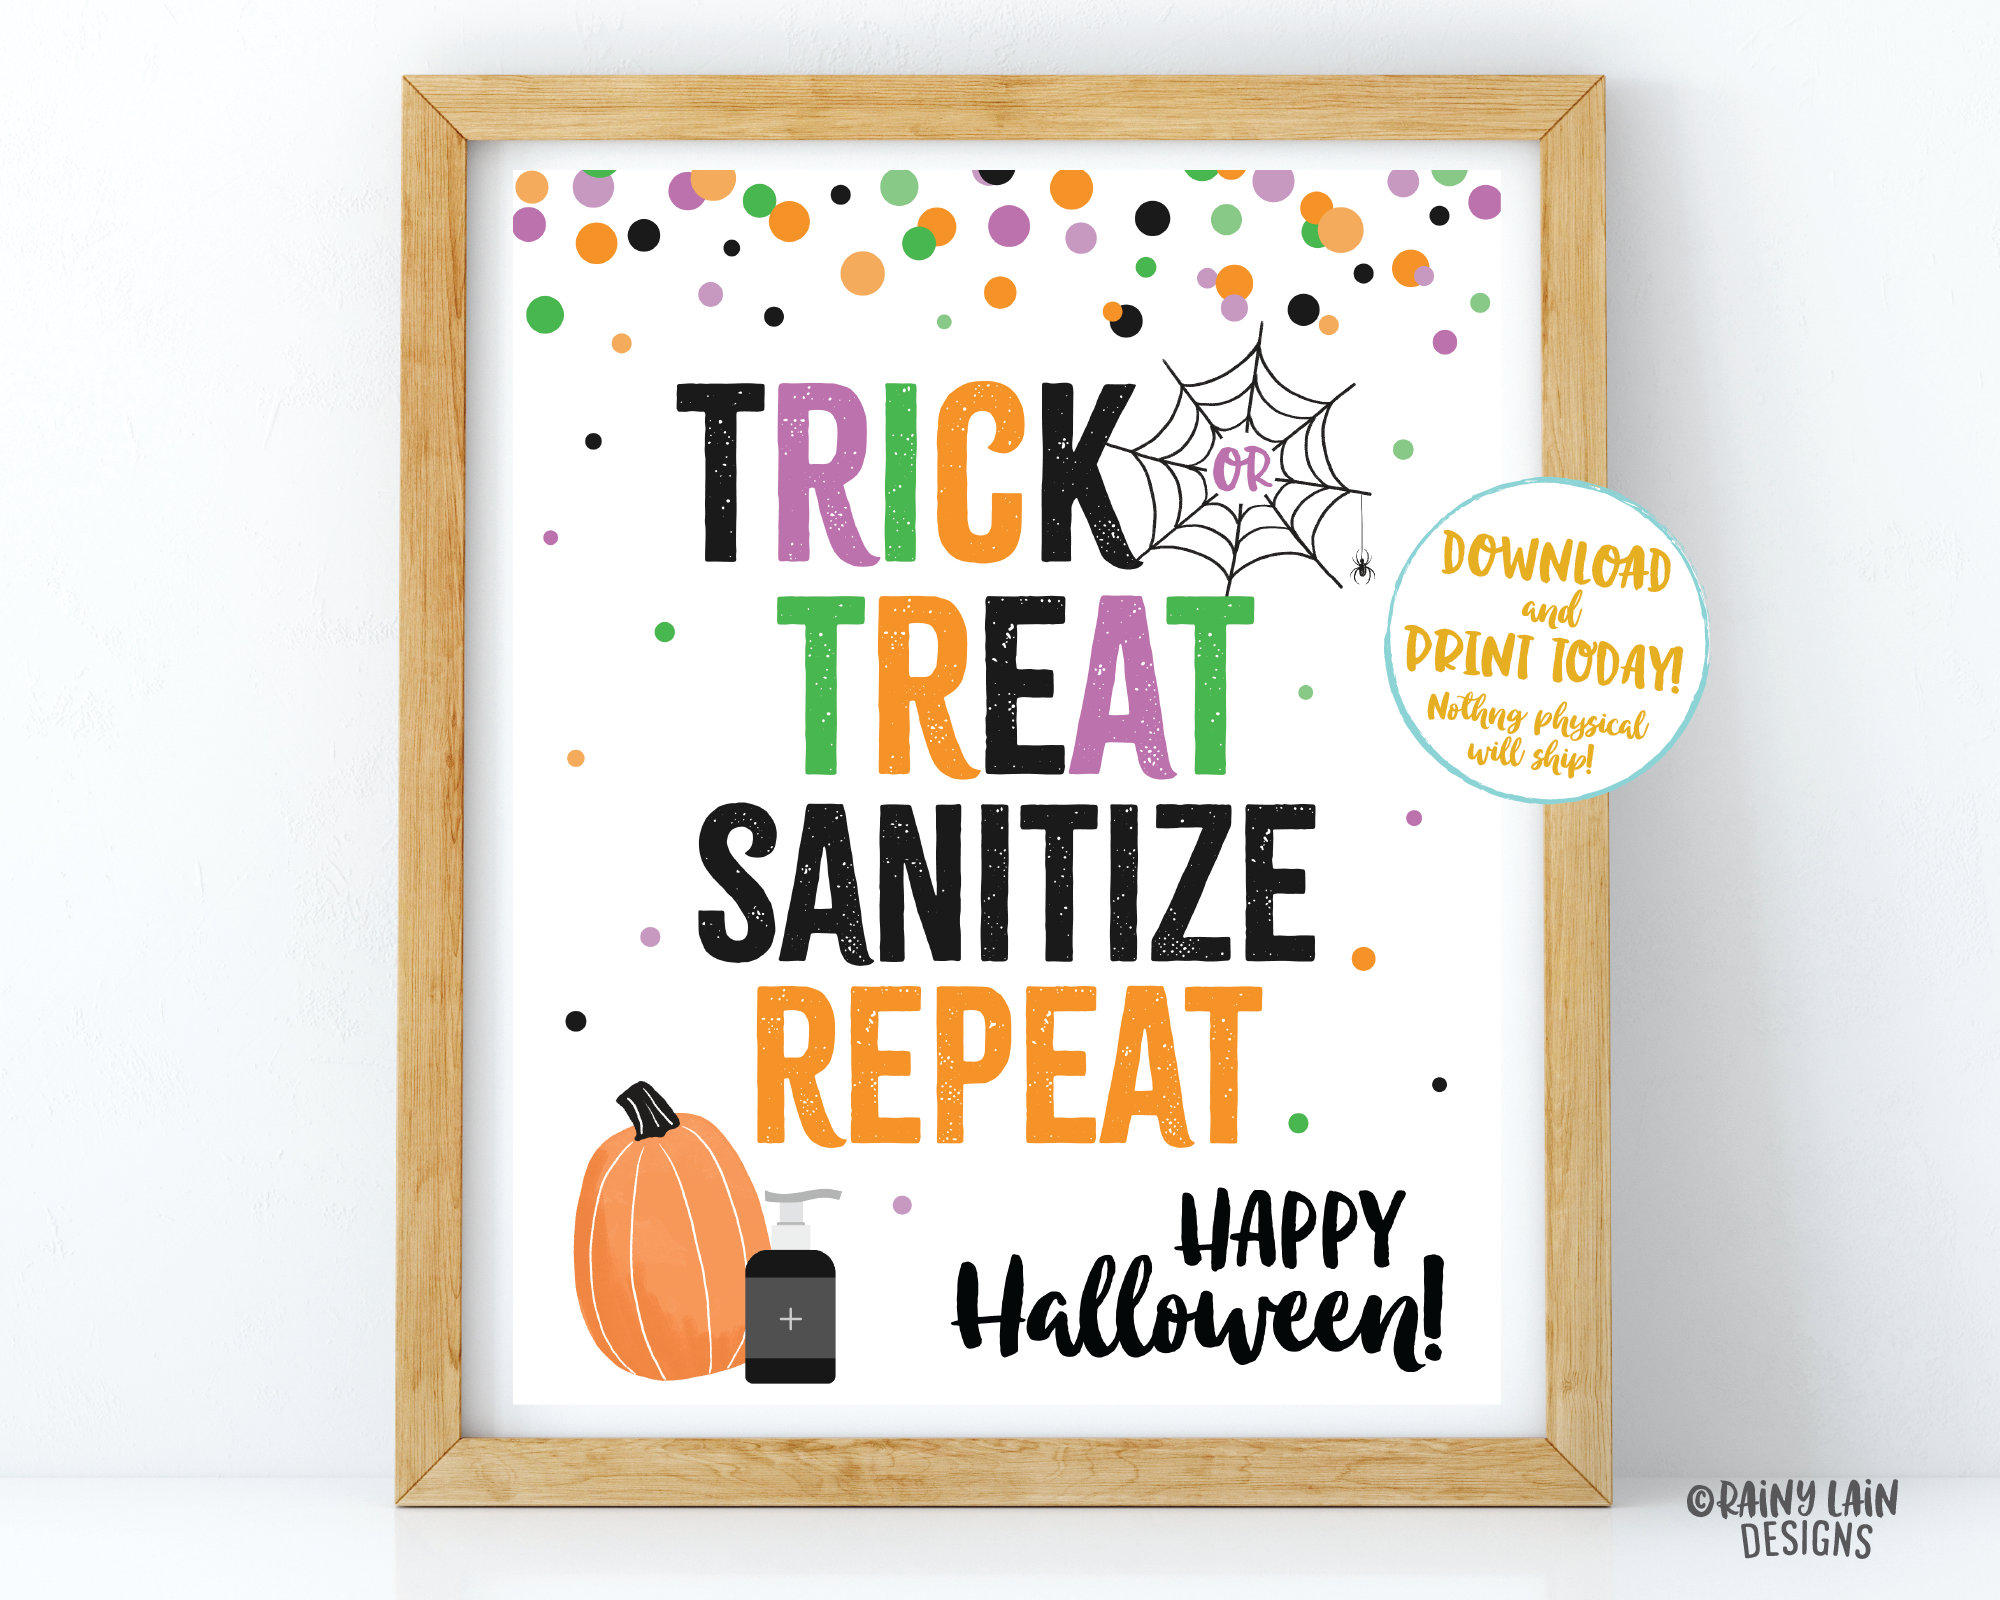 Trick or Treat Sanitize Repeat Sign Halloween Sign Trick or Treat Table Sign Quarantine Social Distancing 2020 Halloween Please take one